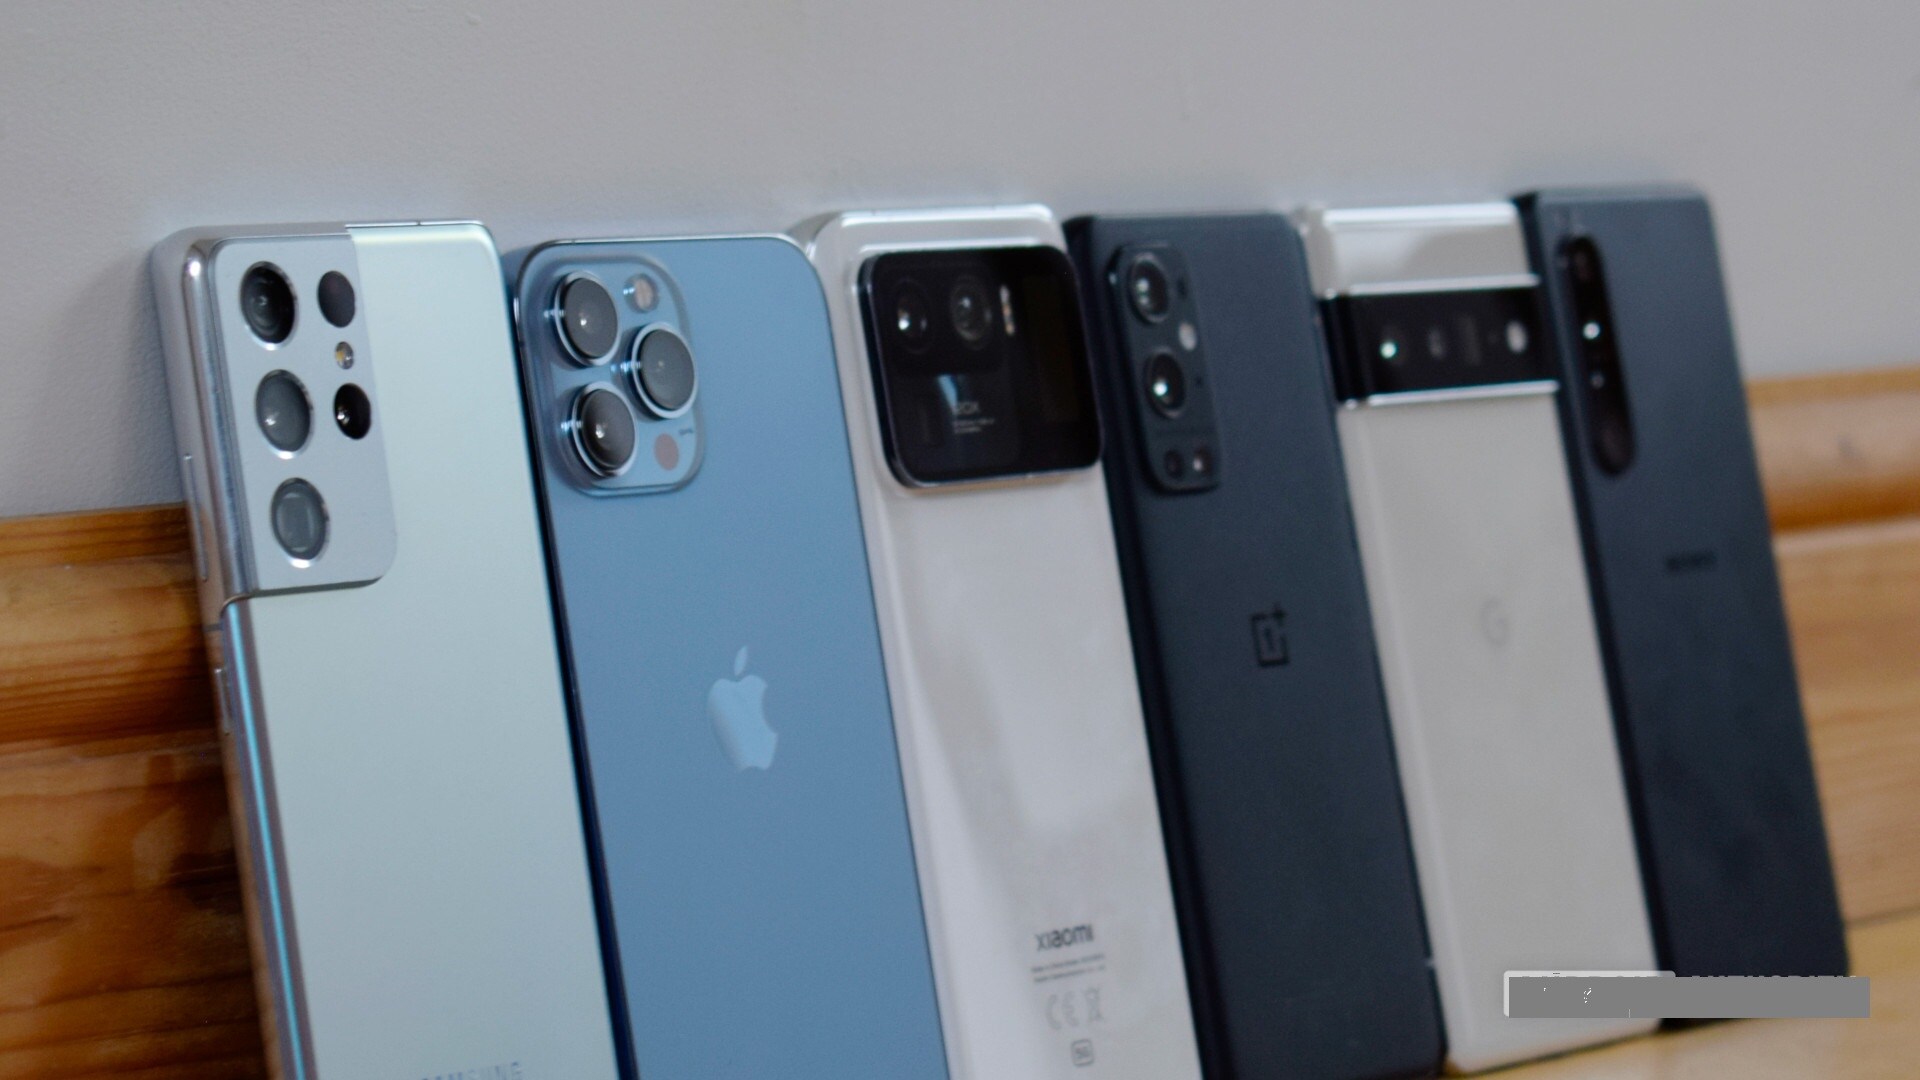 Here are the top 5 best camera smartphones